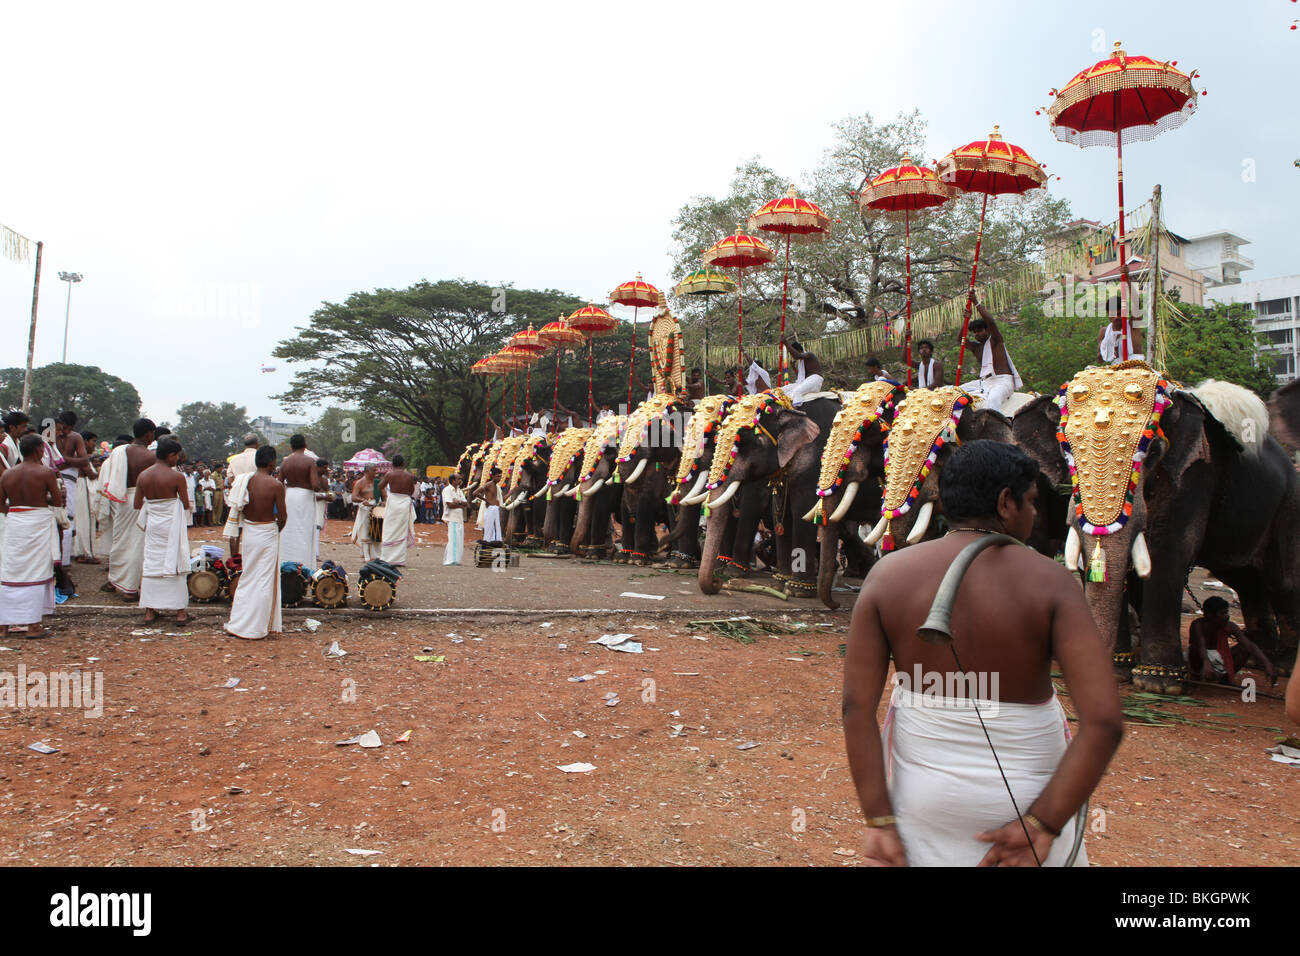 thrissur pooram festival with caparisoned elephants,colored umbrellas,drum playing Stock Photo